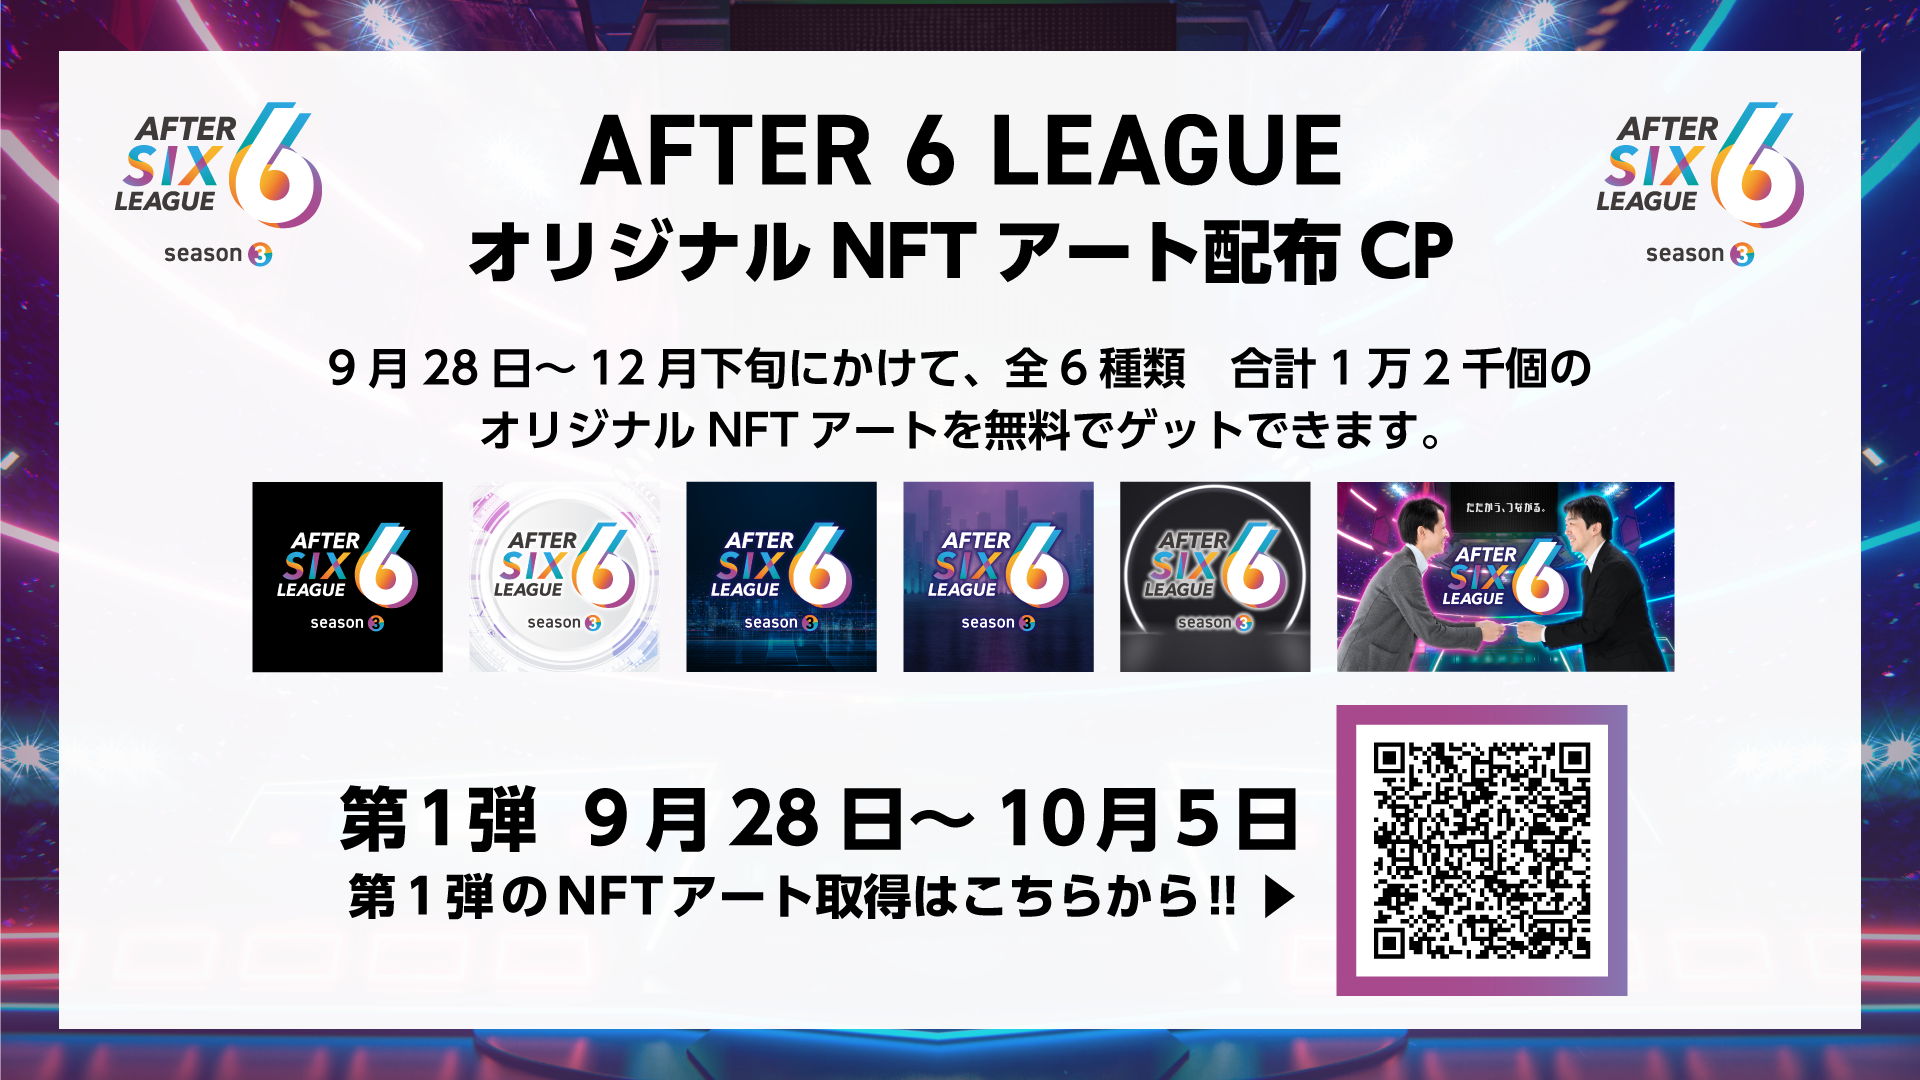 「AFTER 6 LEAGUE™」オリジナルNFTアート無料配布キャンペーンを開始　～最大6種類、合計12,000個を無料配布～